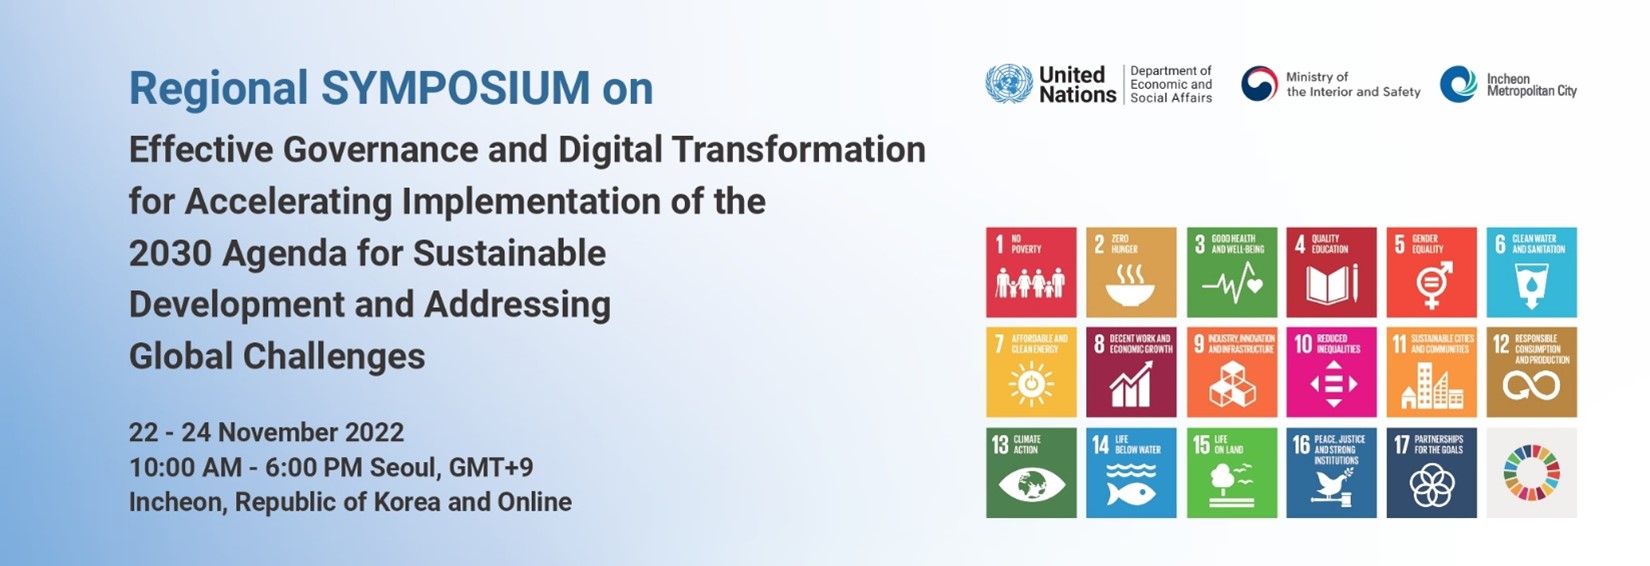 Regional Symposium on  Effective Governance and Digital Transformation for Accelerating Implementation of the 2030 Agenda for Sustainable Development and Addressing Global Challenges